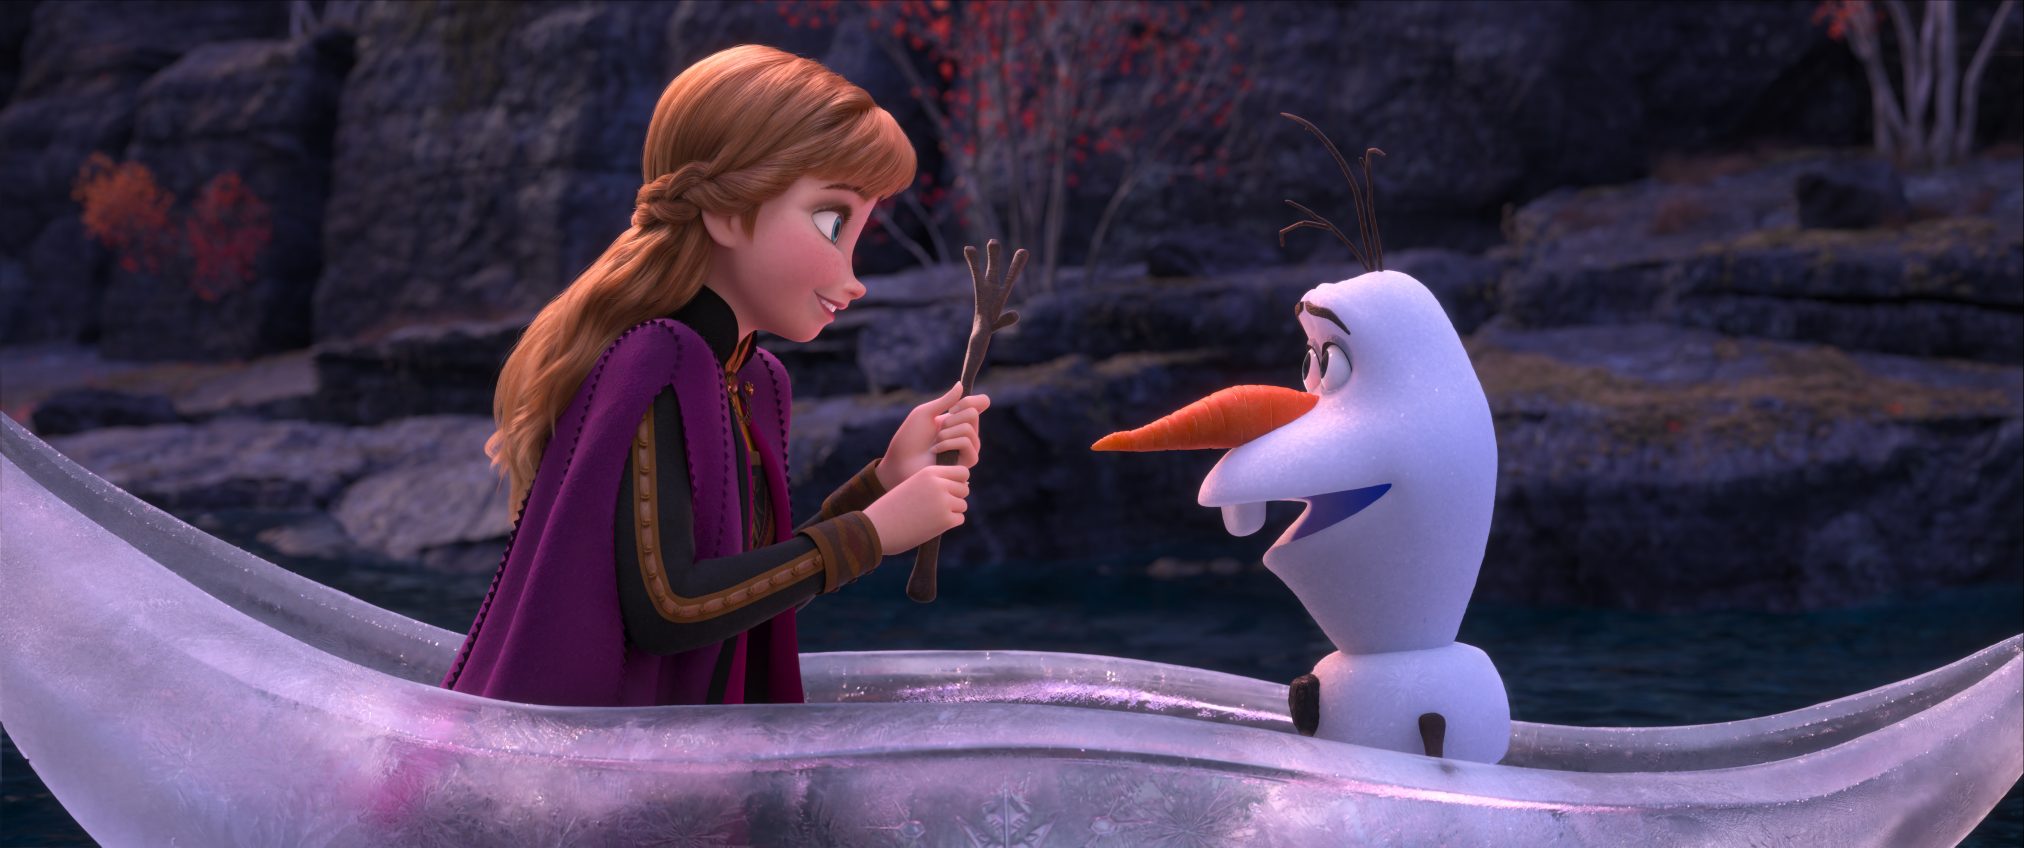 Don't Miss Disney's Frozen 2 New Trailer and Poster! In theaters Nov 22nd! #Frozen2